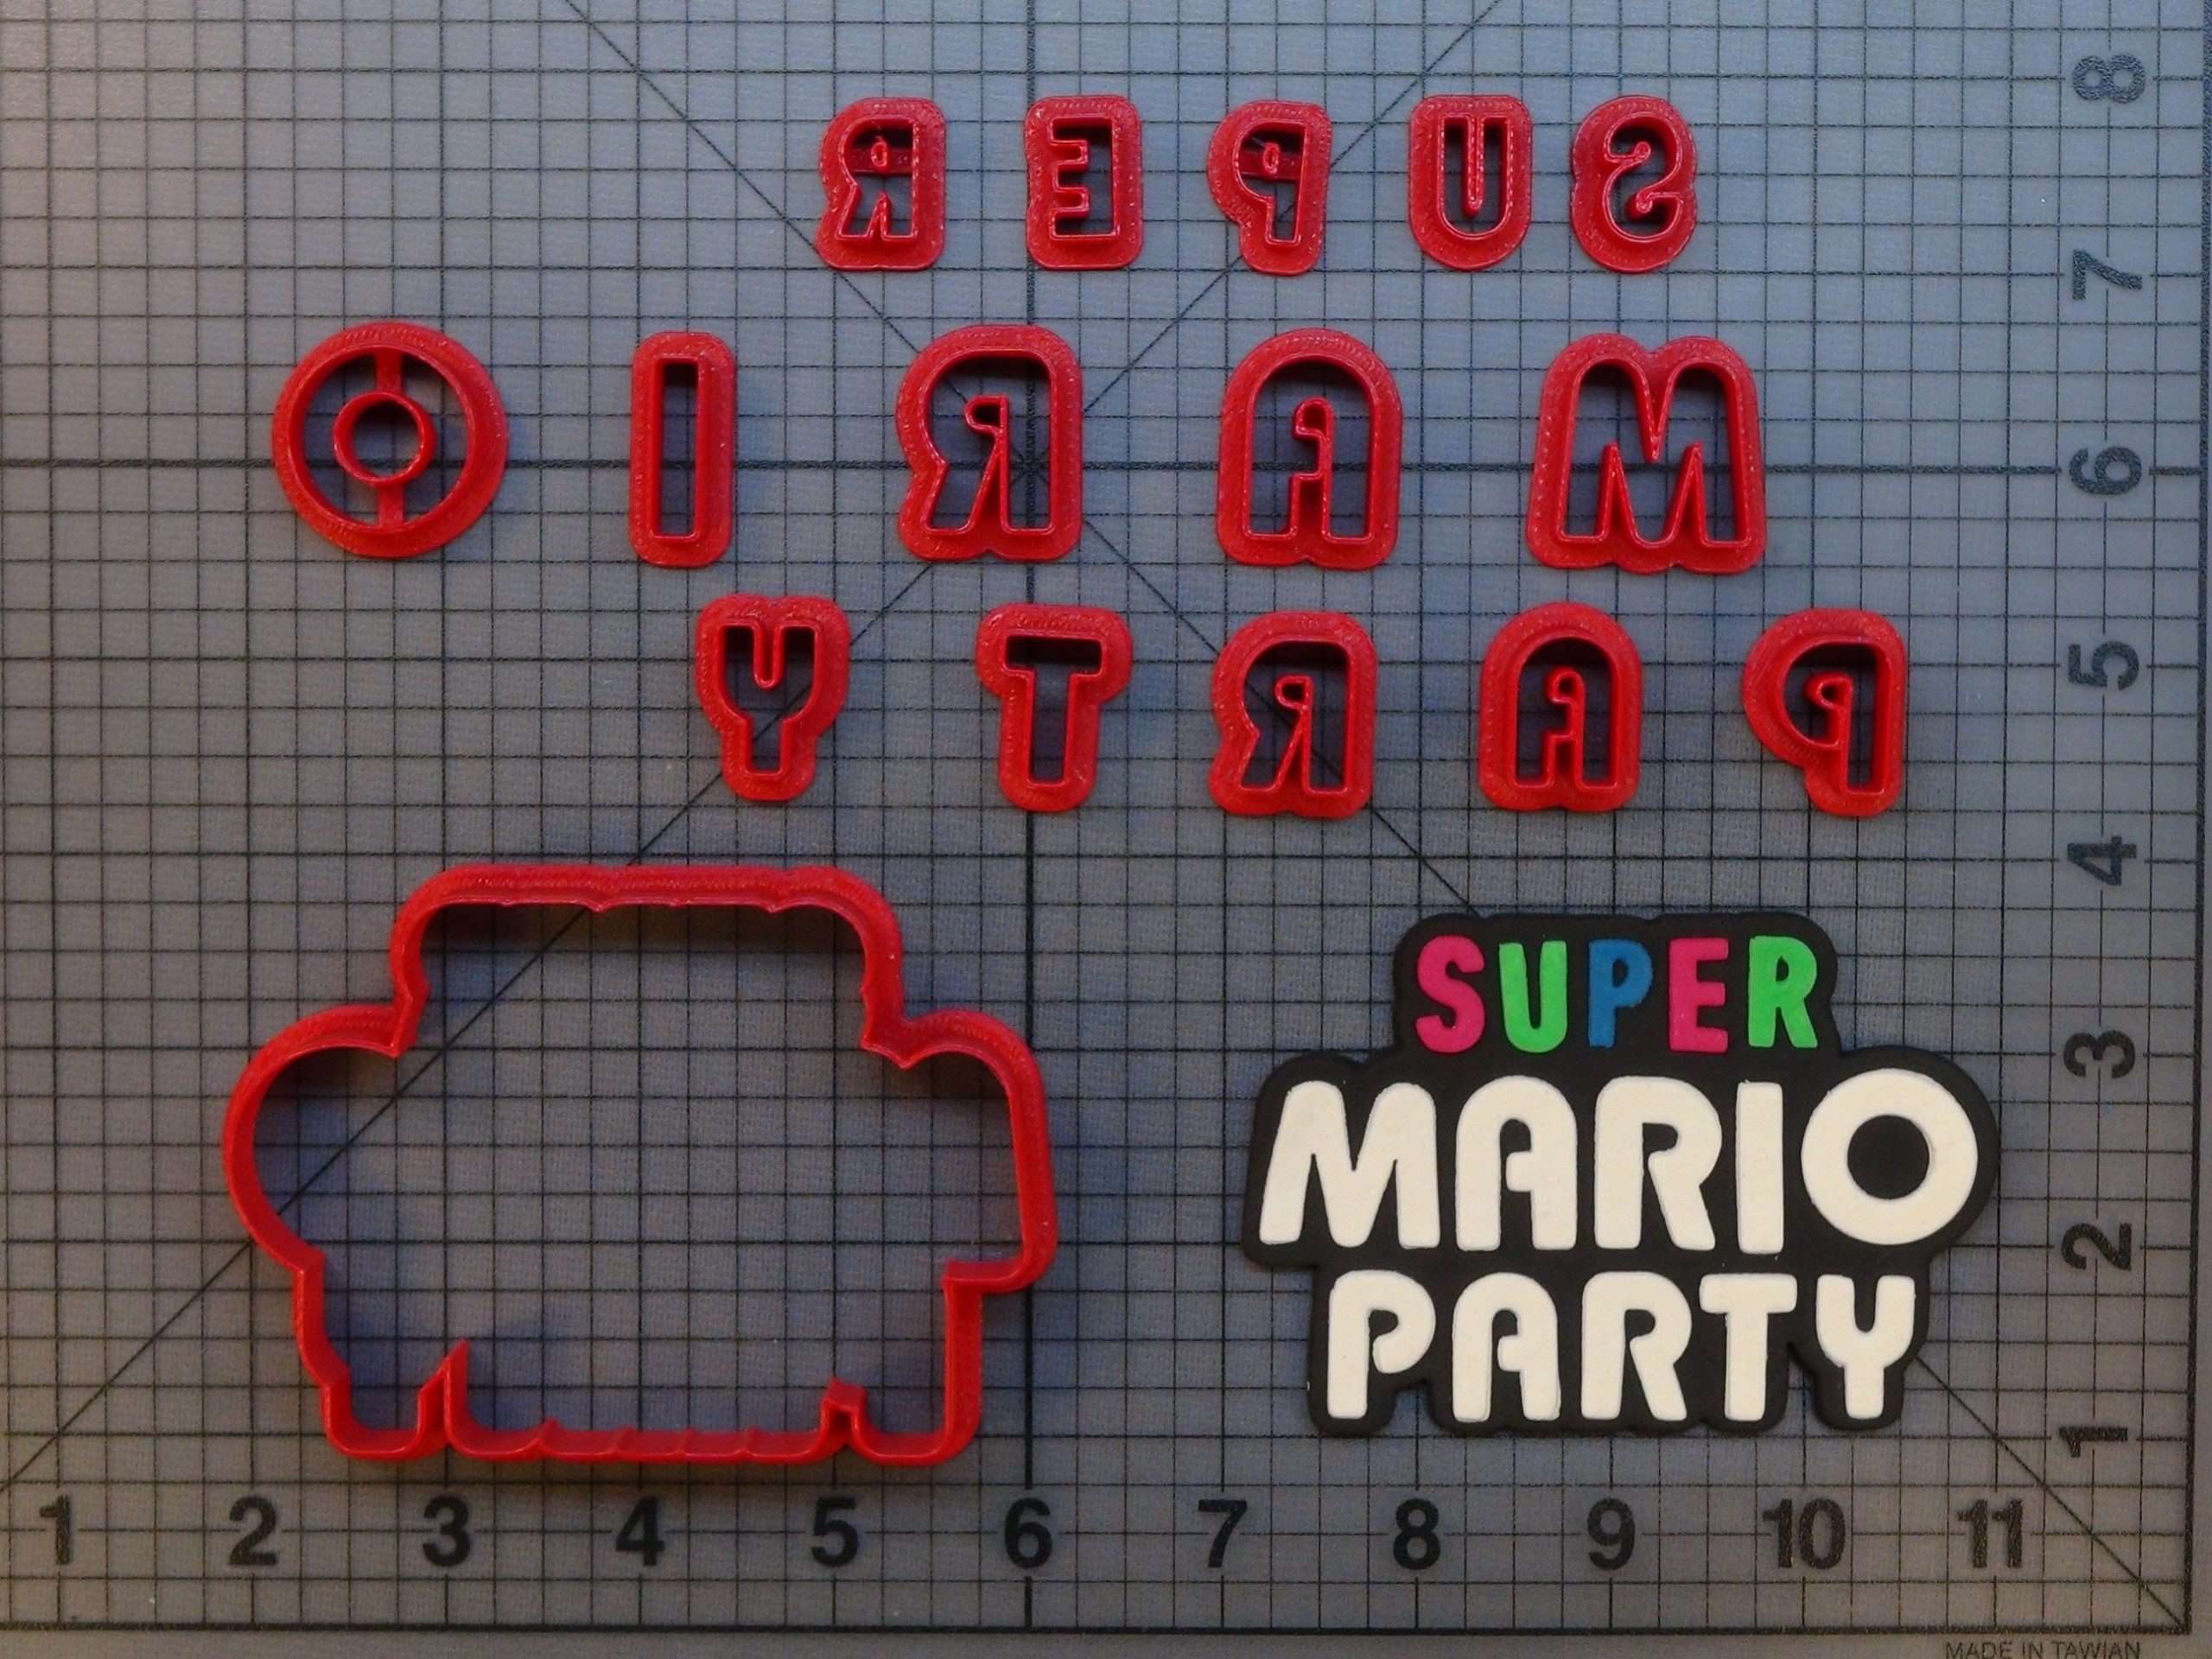 Happy 10th anniversary Mario Party 9! You may not be everyone's